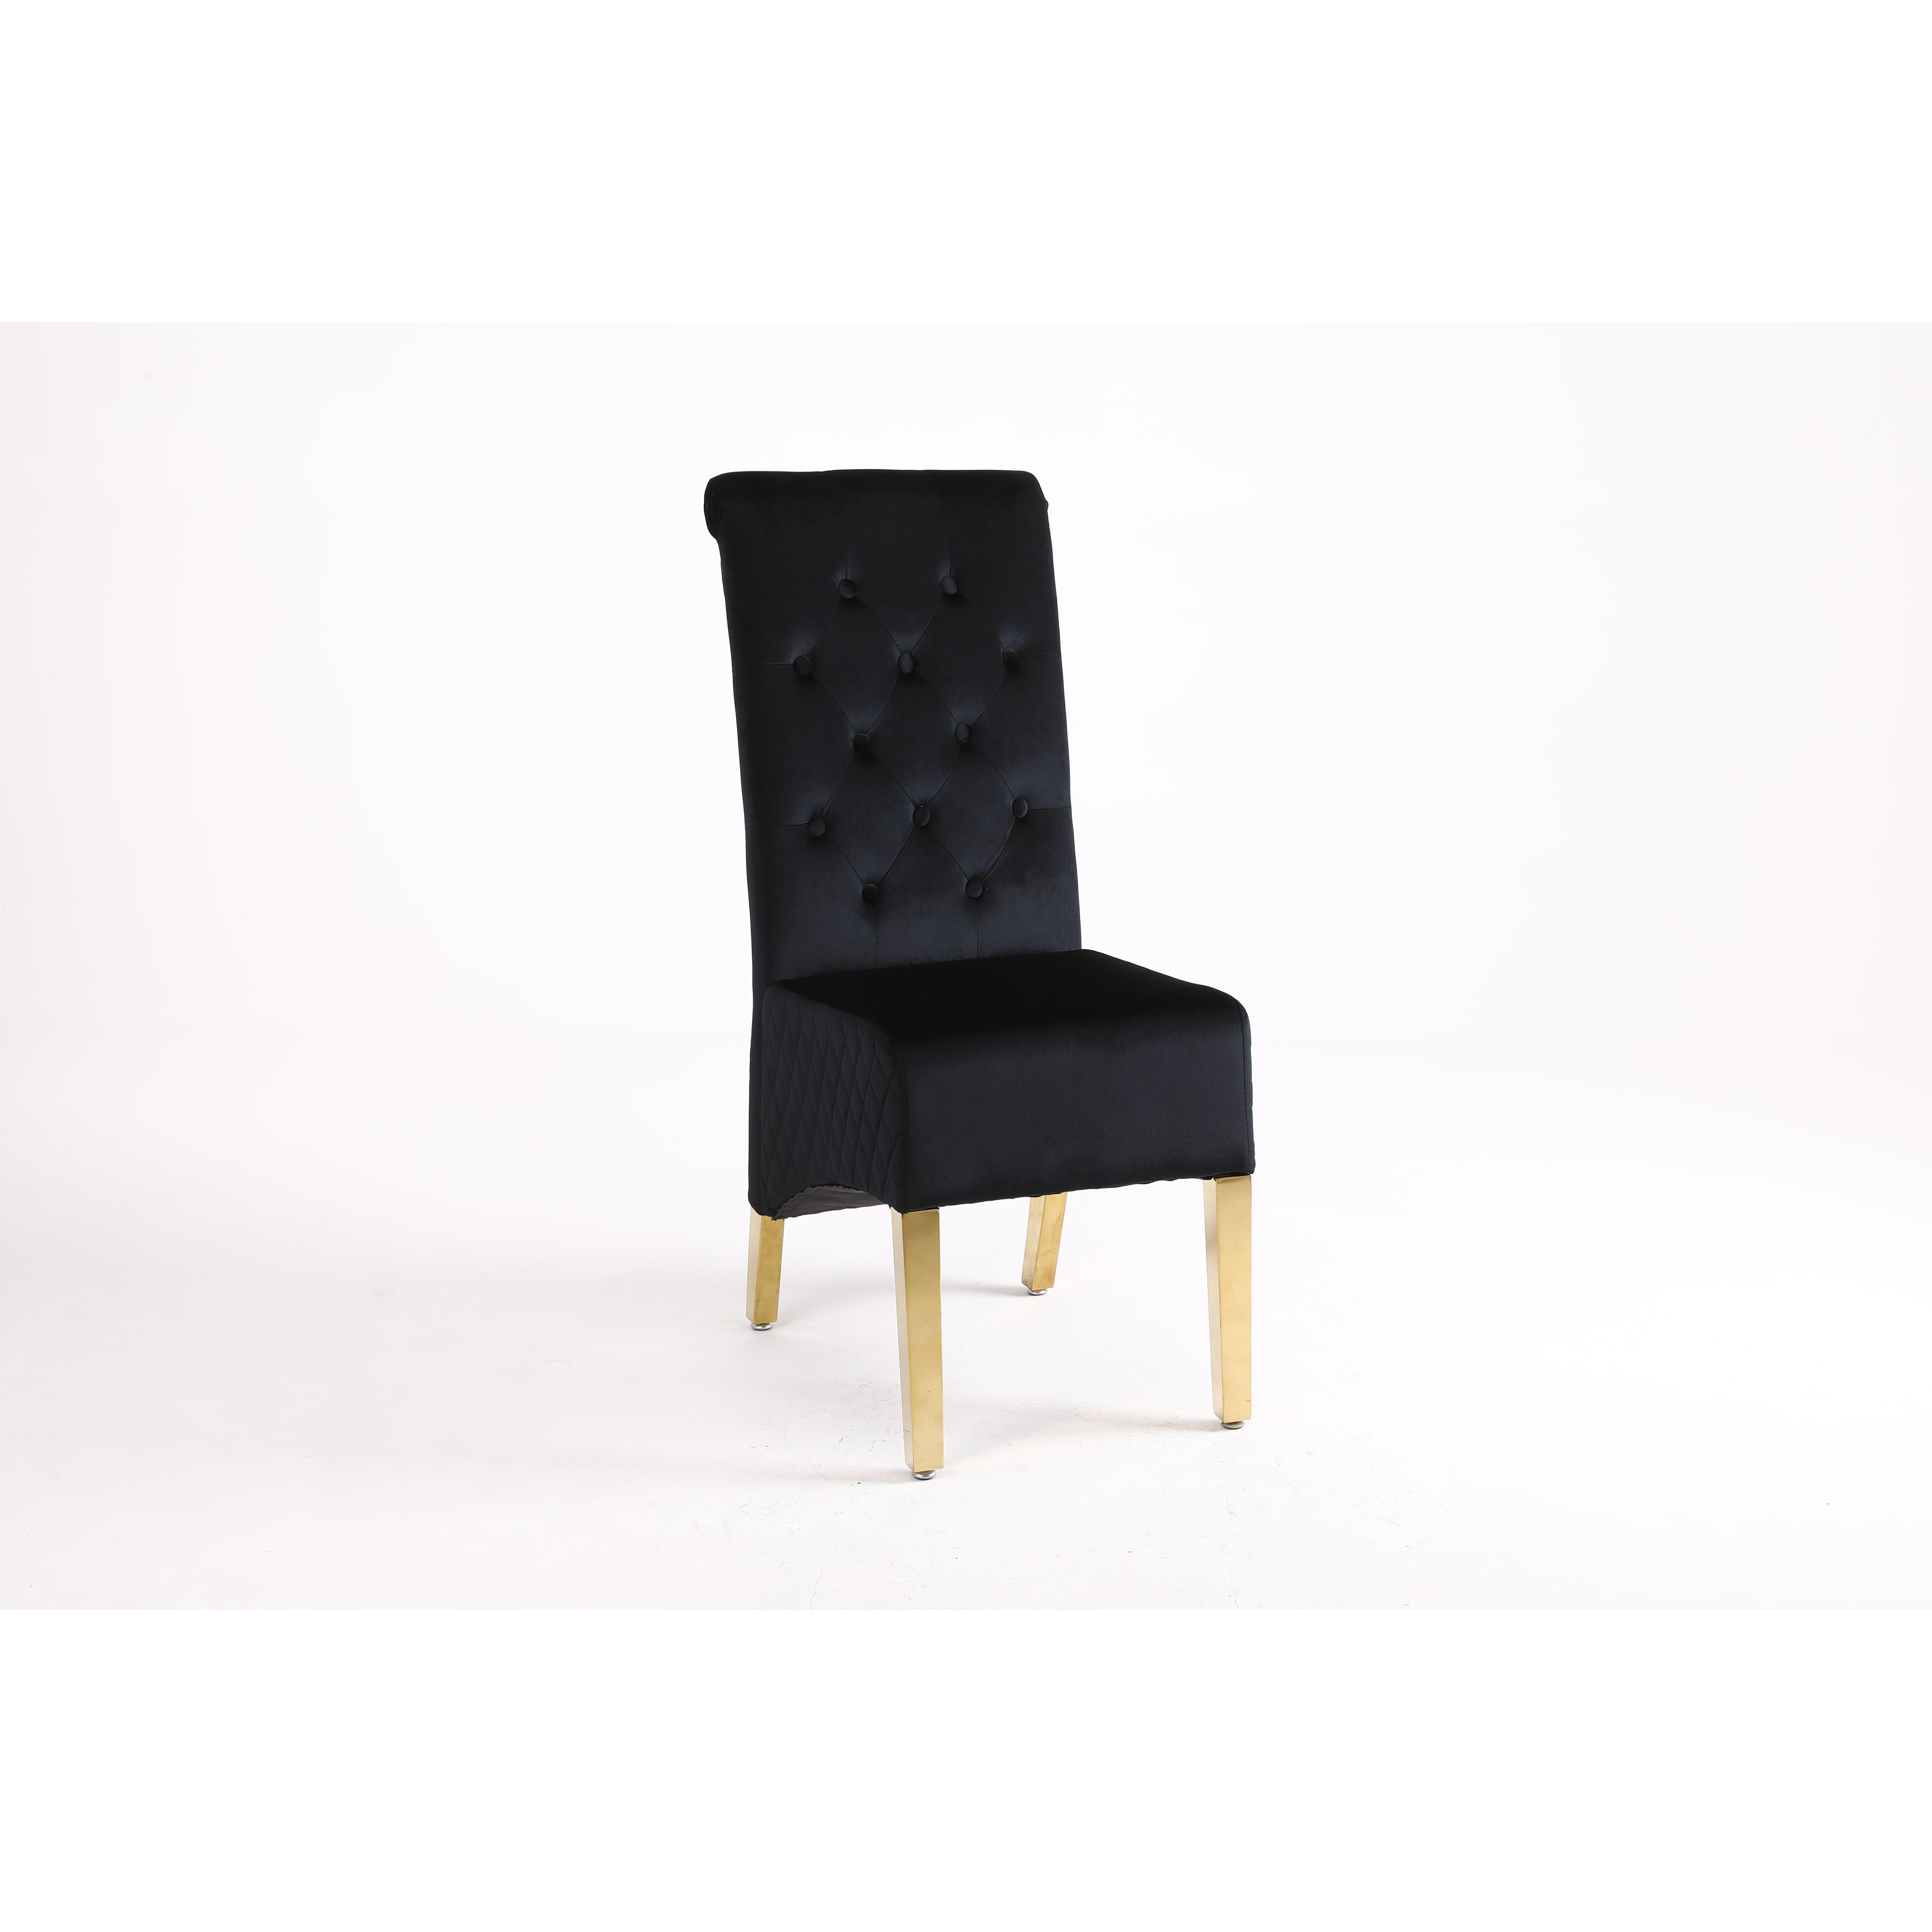 A Pair (x2)  Velvet High Back Dining Chairs with Golden Chrome Knocker & Legs - image 1